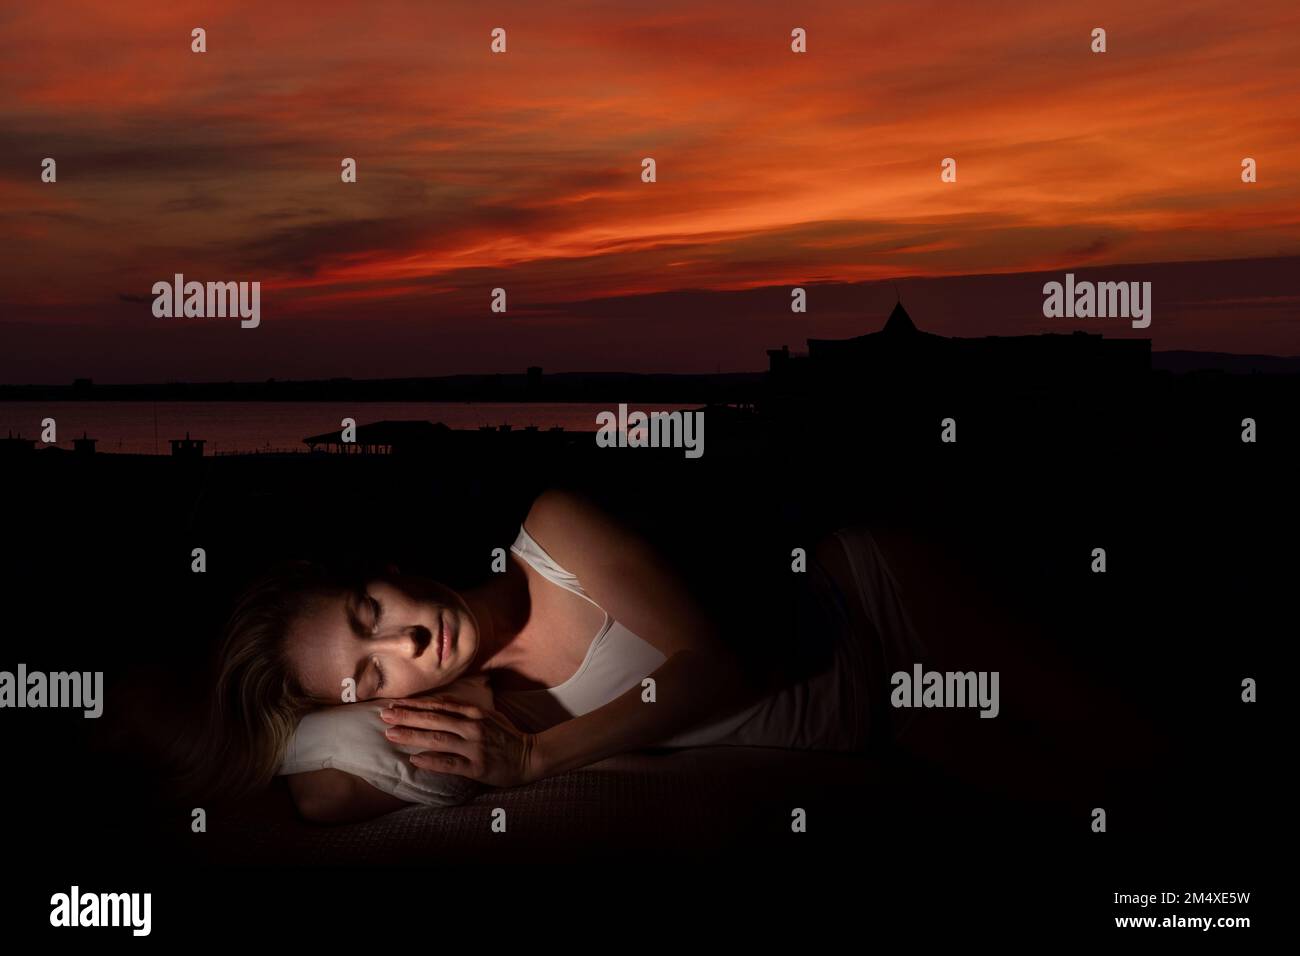 Woman with eyes closed sleeping at sunset Stock Photo